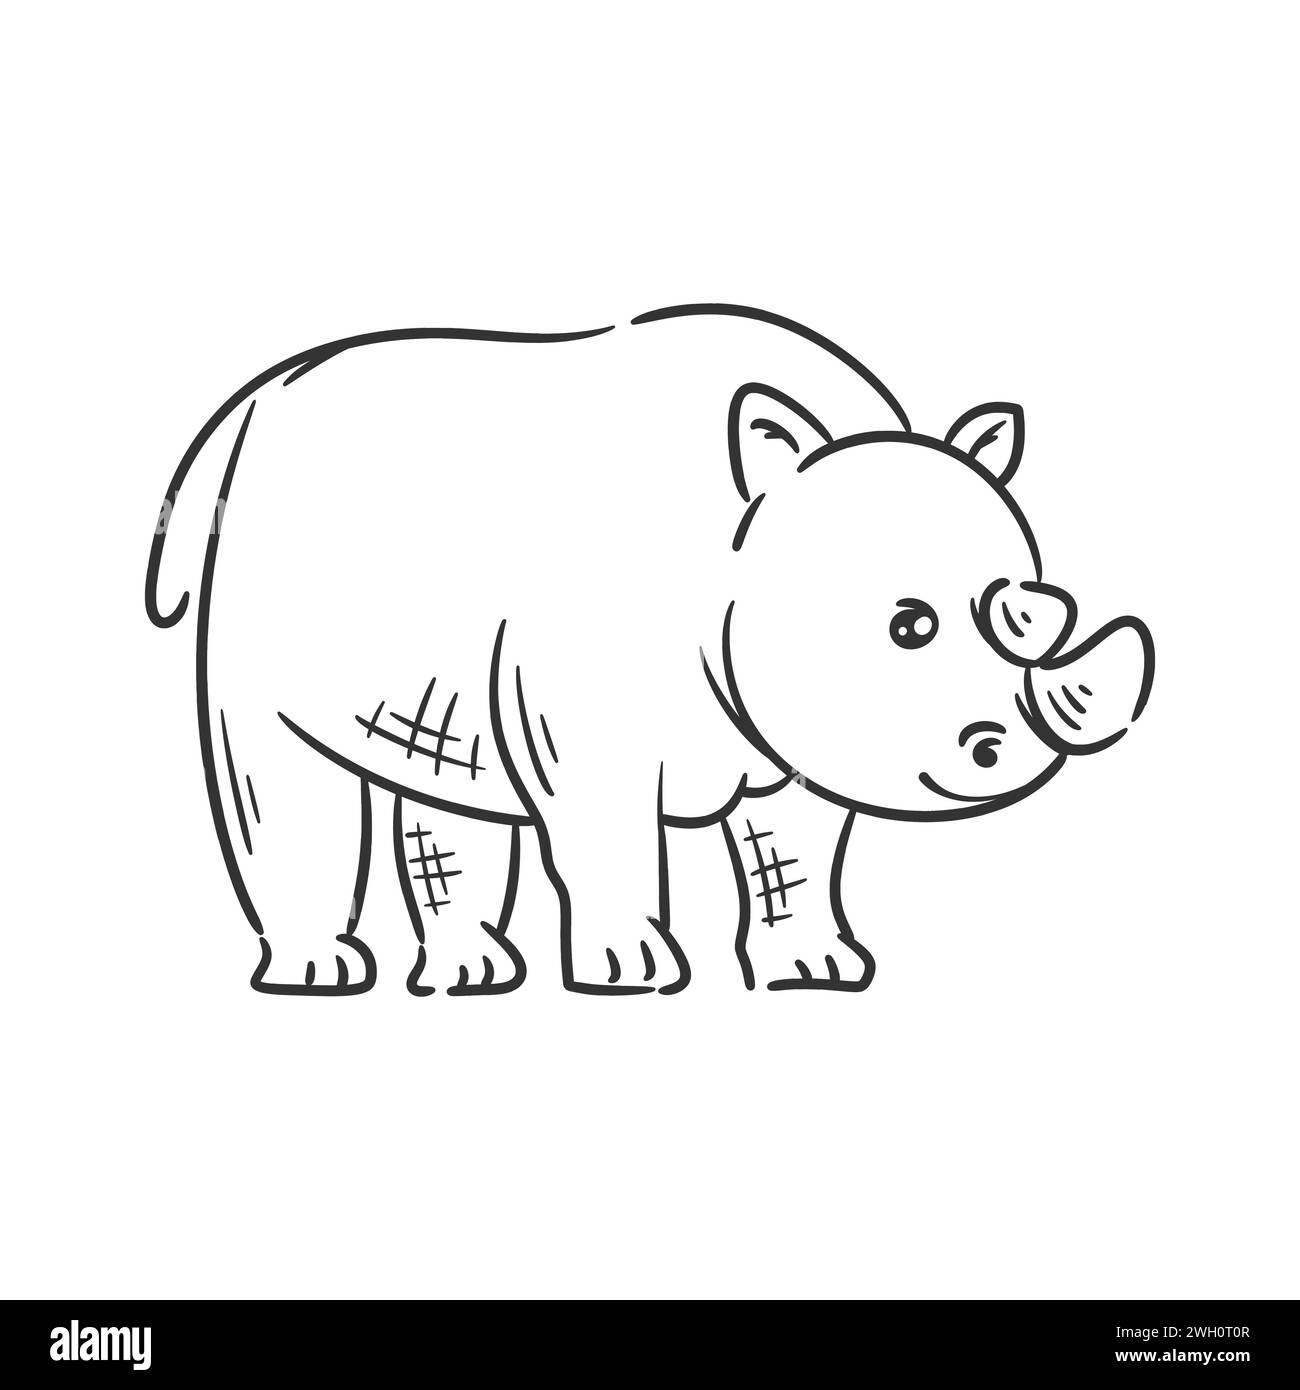 Hand drawn cute rhinoceros design for coloring Stock Vector